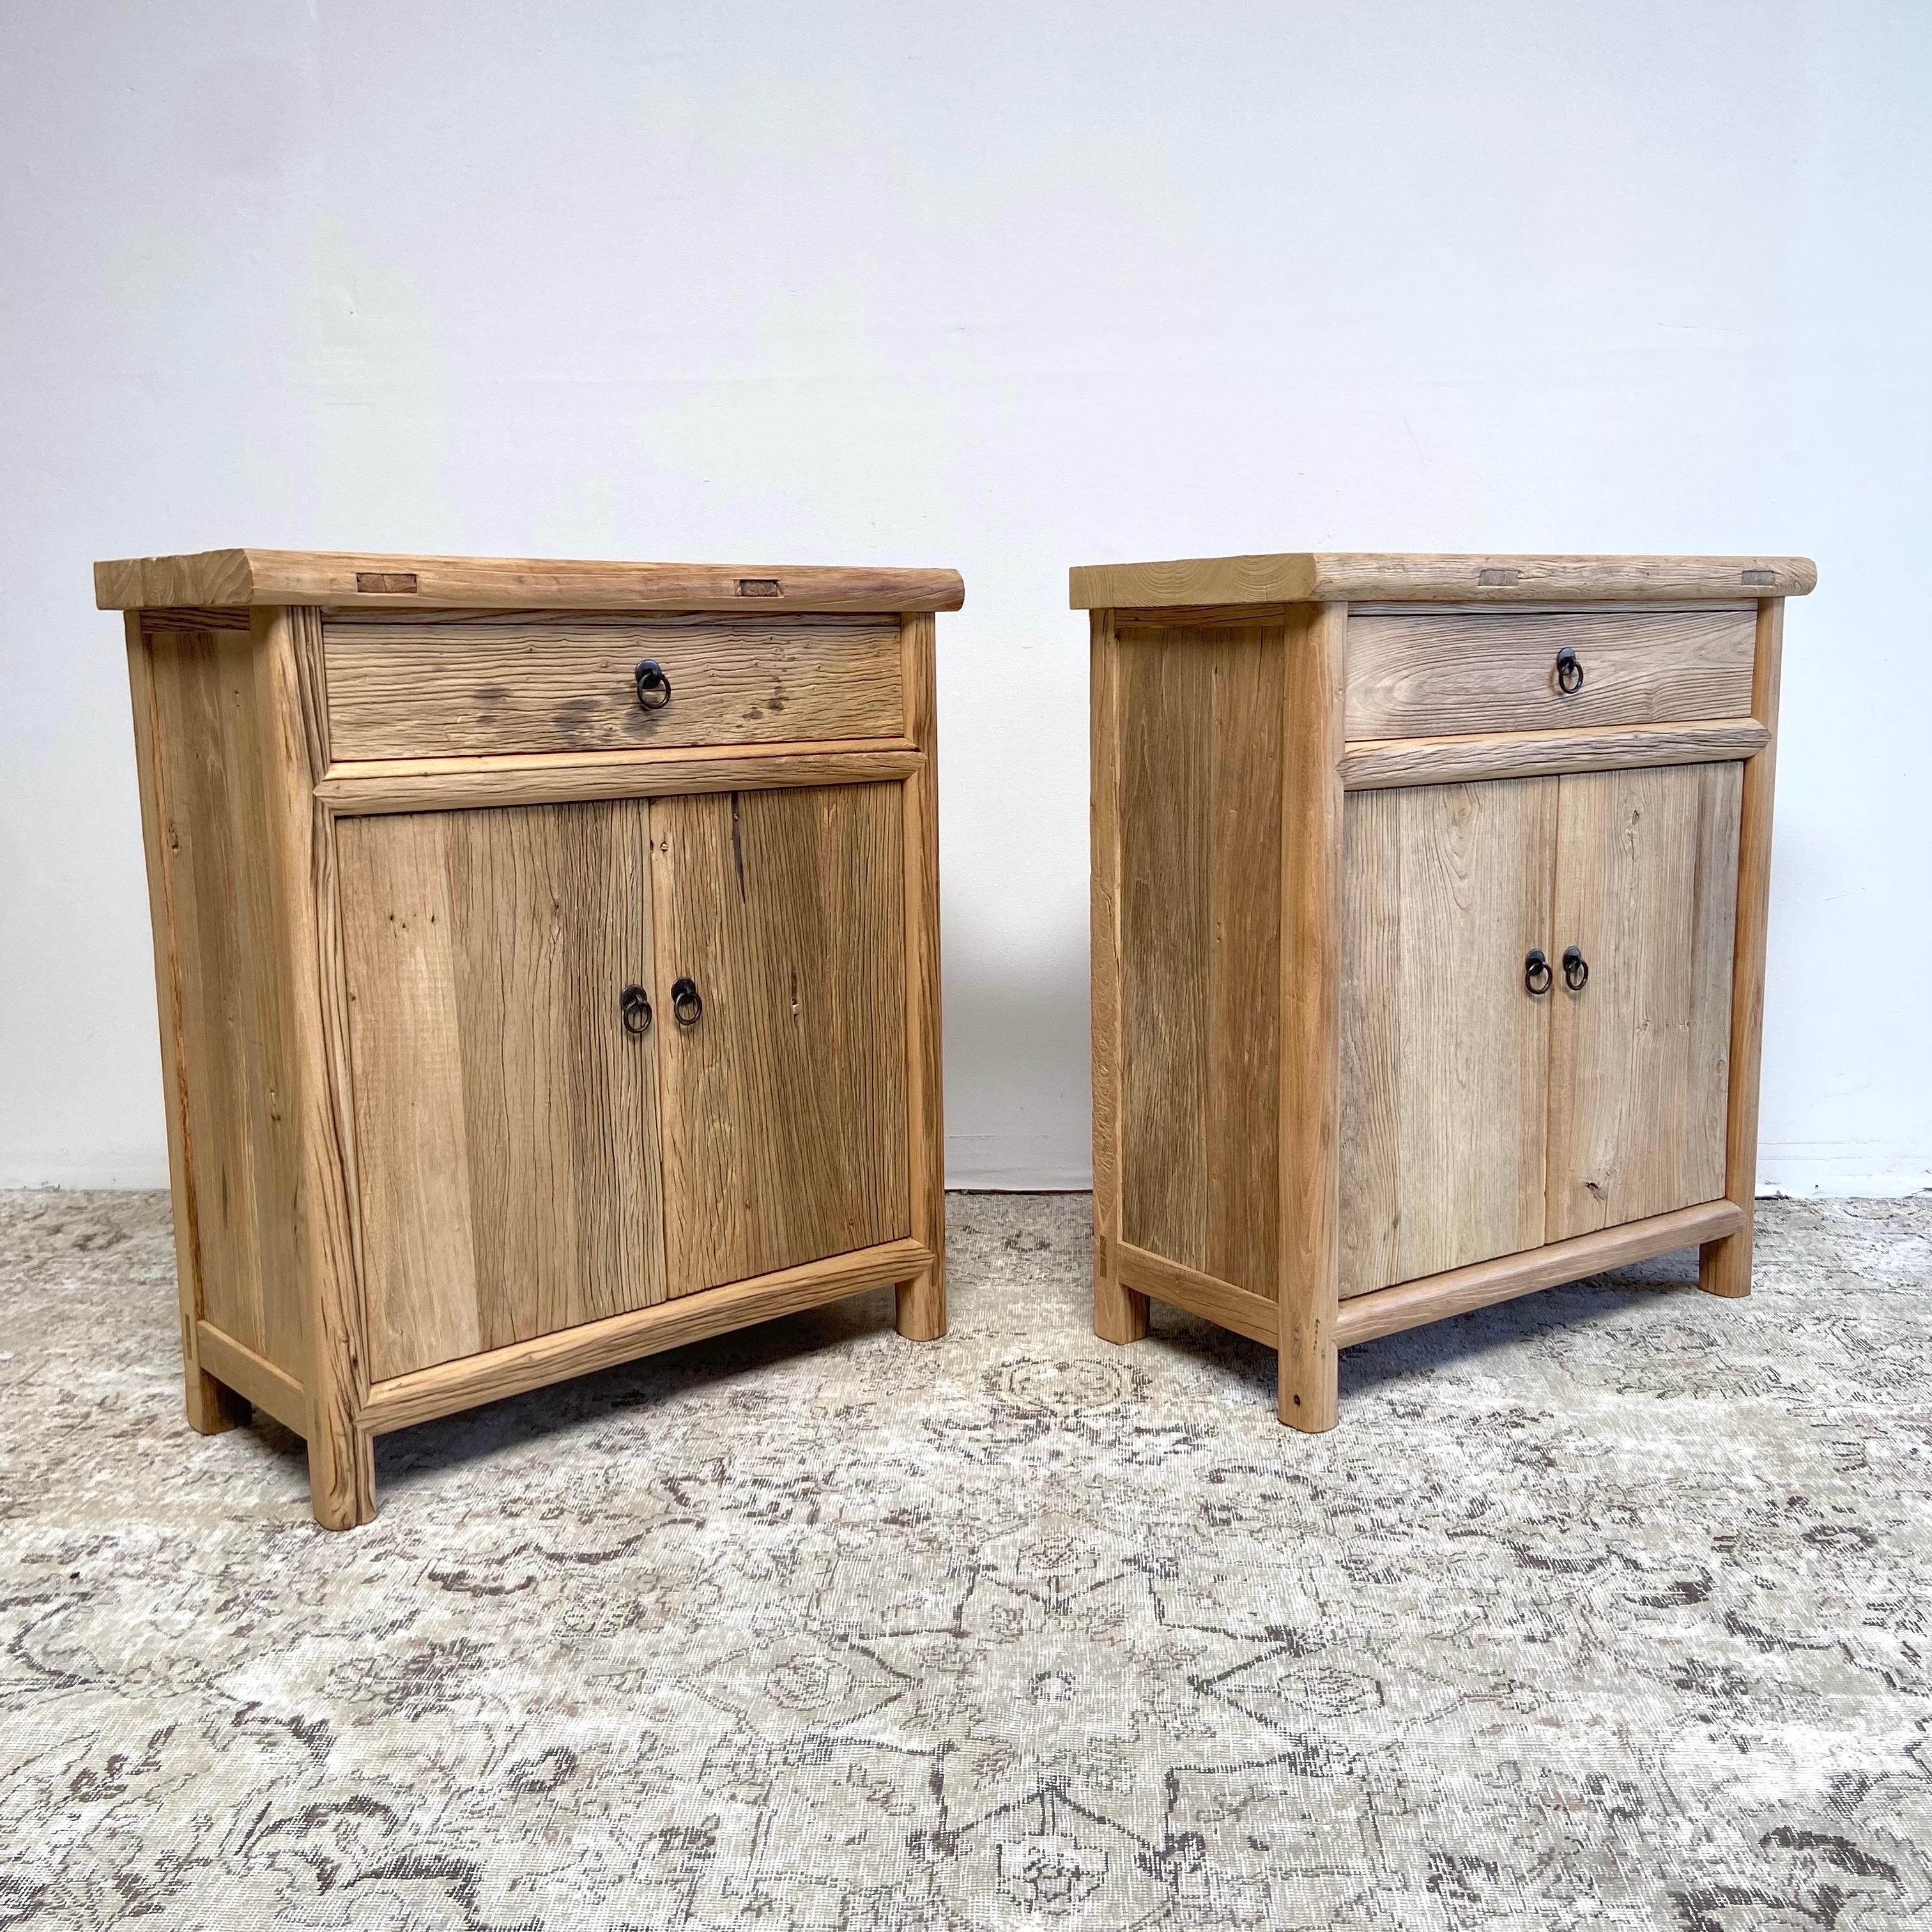 Qty 2 elm cabinets / sold individually
Beautiful patina, elm wood cabinets with drawer and double door storage.
Solid sturdy can be custom made to any size. Please allow 12-16 weeks for a custom order.
Size: 32” W x 16” D x 36” H 
Natural raw